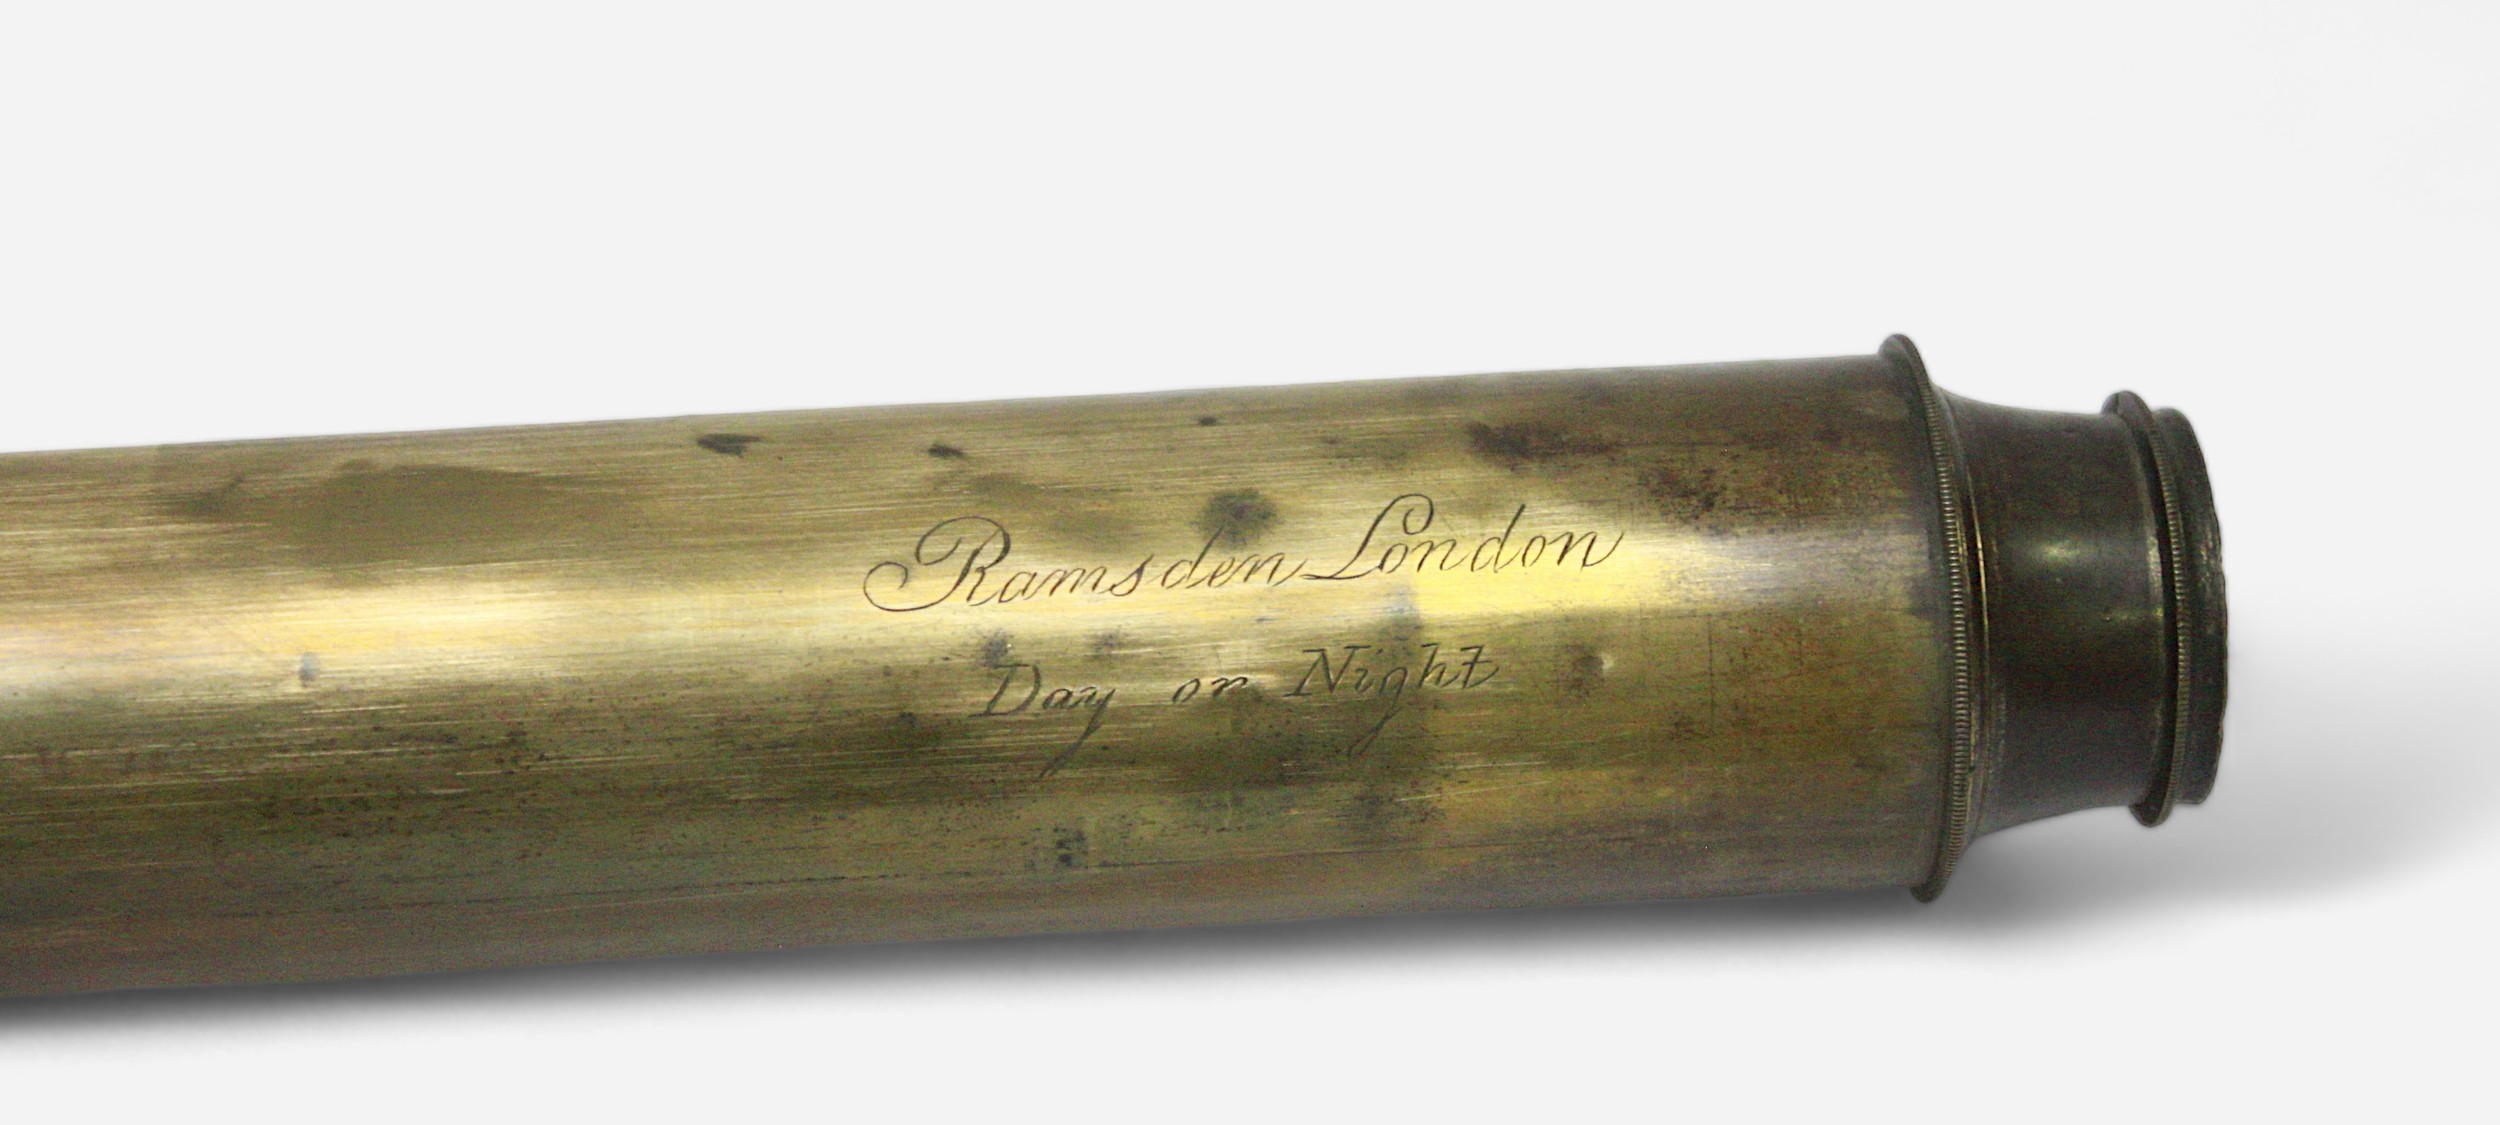 A George III brass single-draw telescope by Jesse Ramsden, London, with shuttered eyepiece and - Image 3 of 3